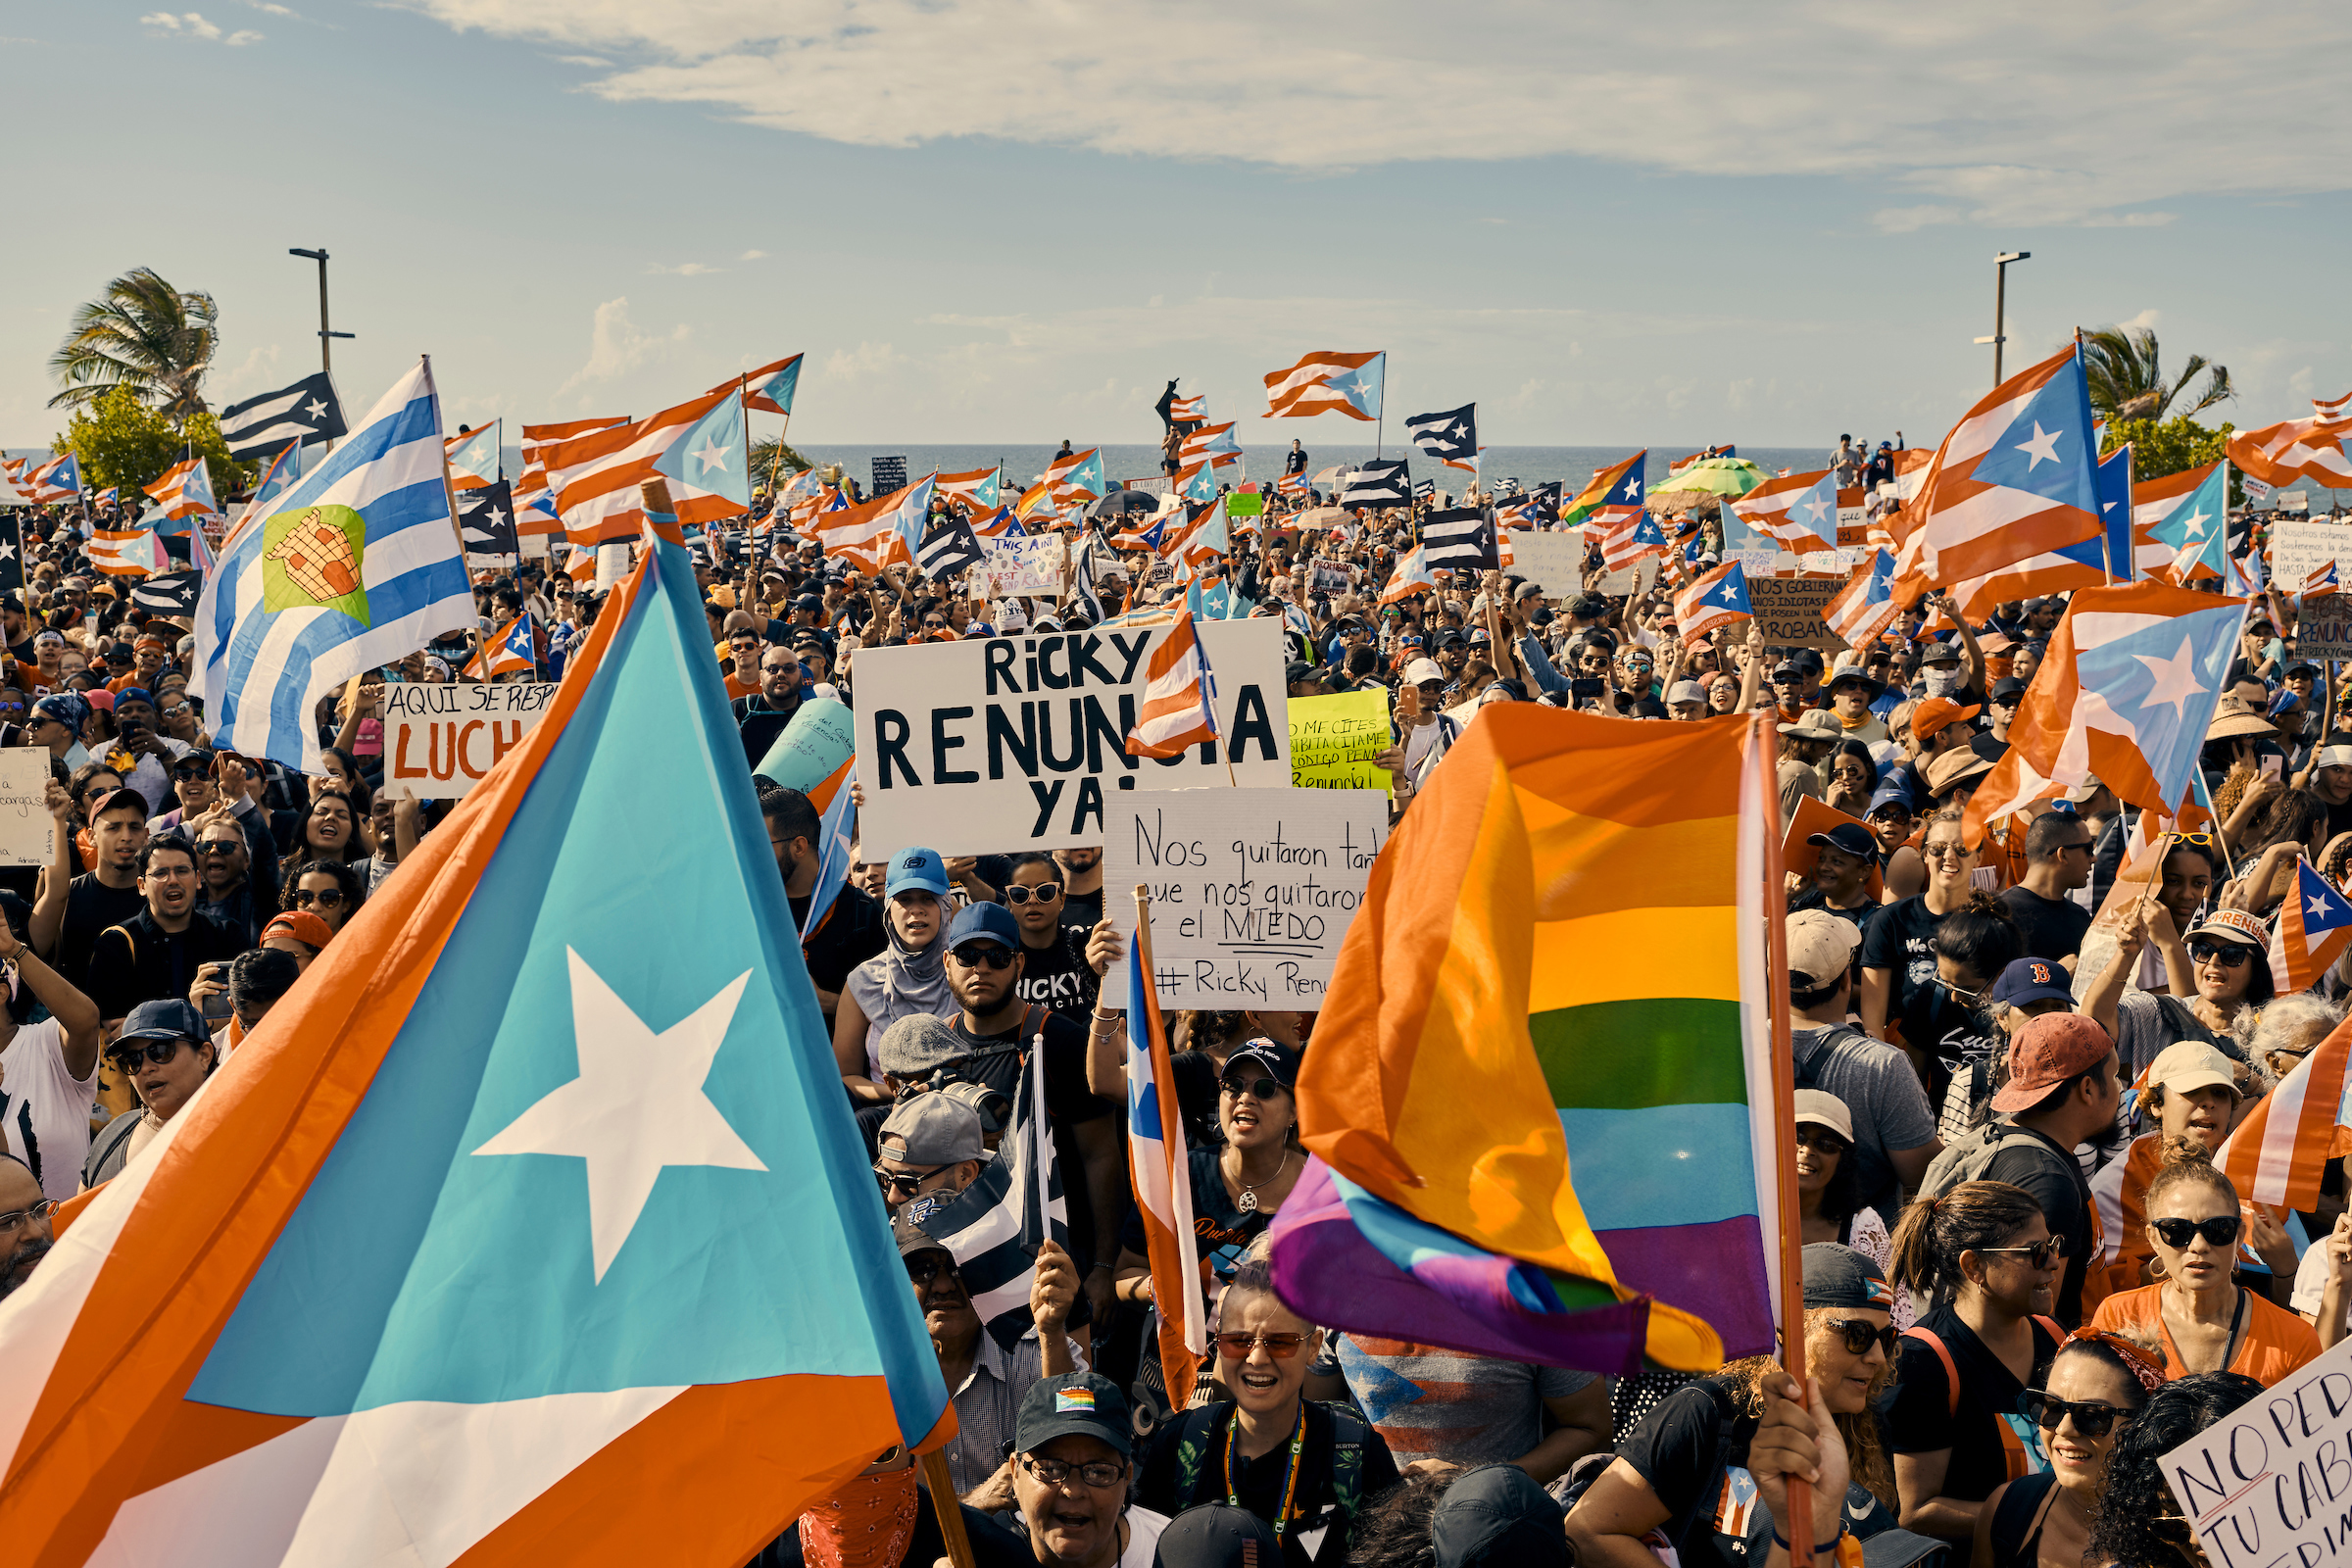 Protesters demanding #RickyRenuncia—a hashtagged demand for the governor's resignation—took to the streets of San Juan on July 17, 2019. (Christopher Gregory for TIME)